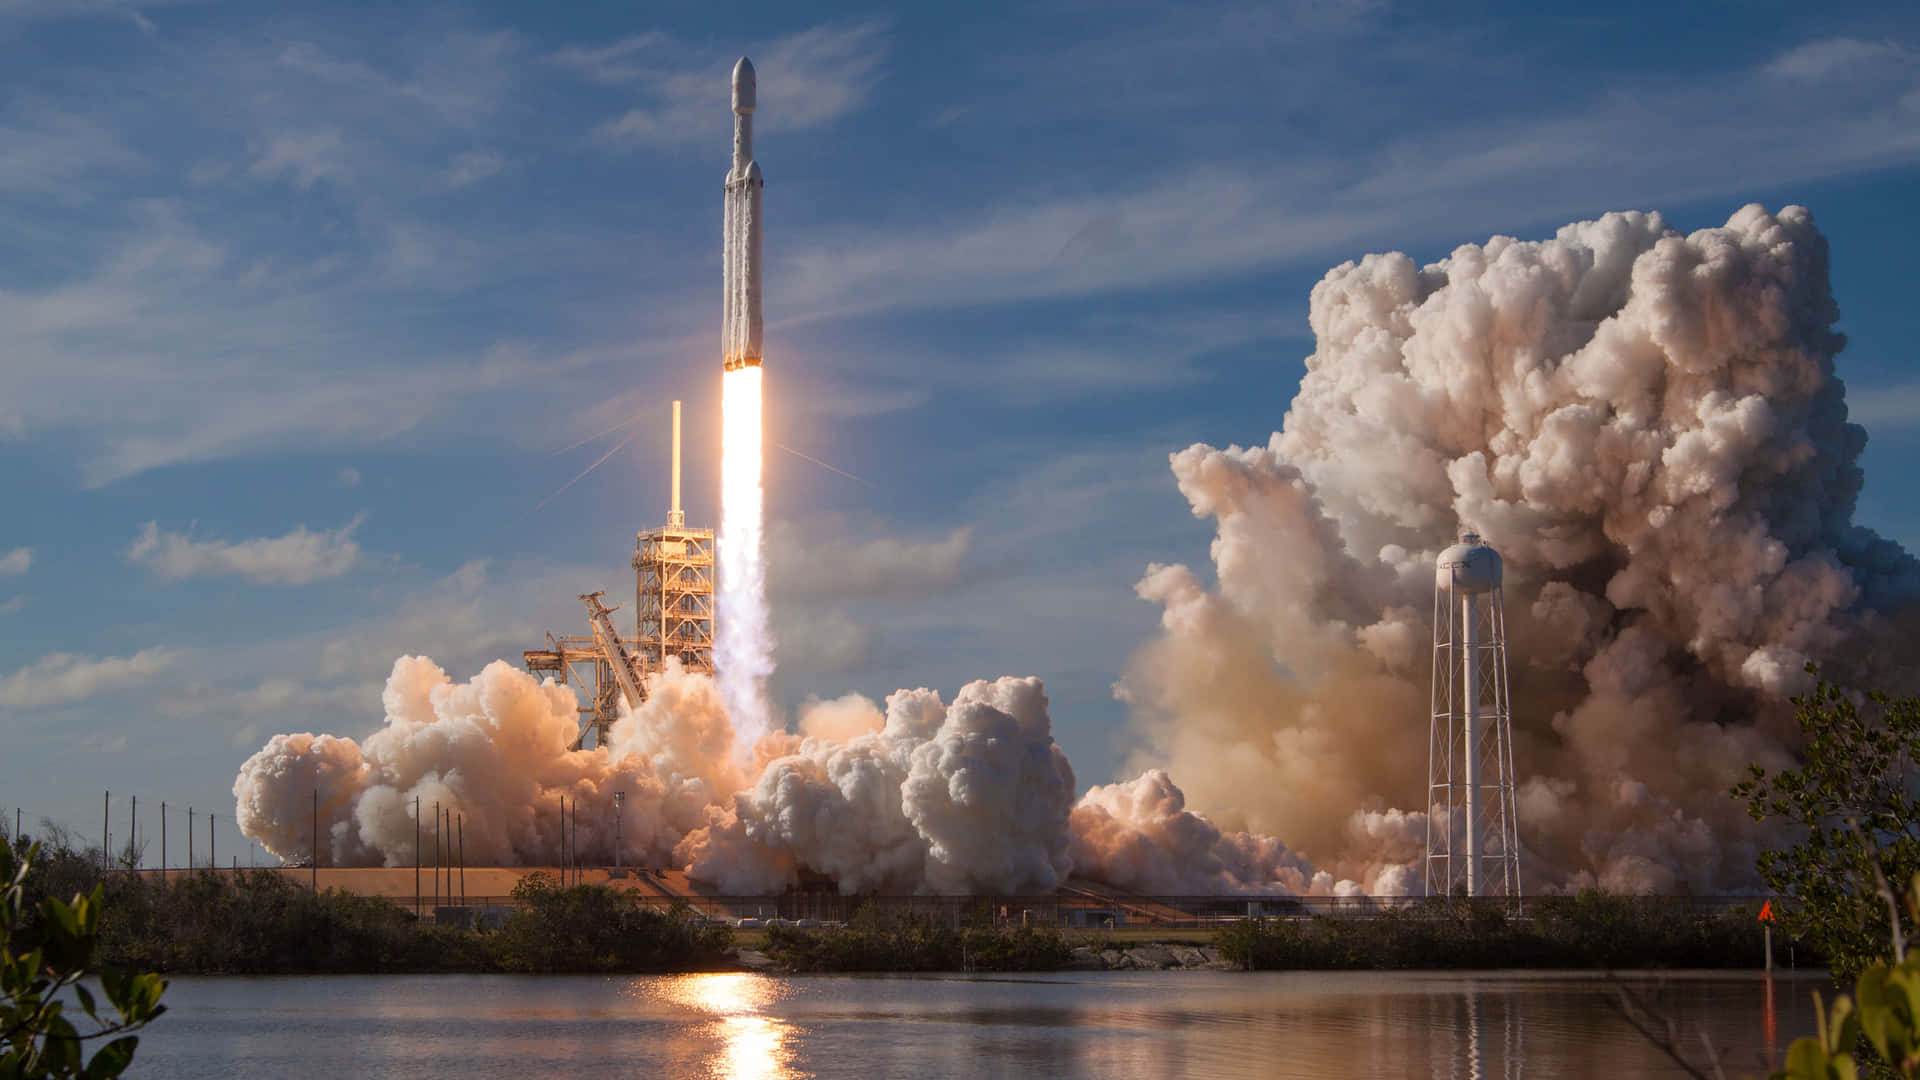 1440p Space The SpaceX Falcon Heavy Rocket Wallpaper